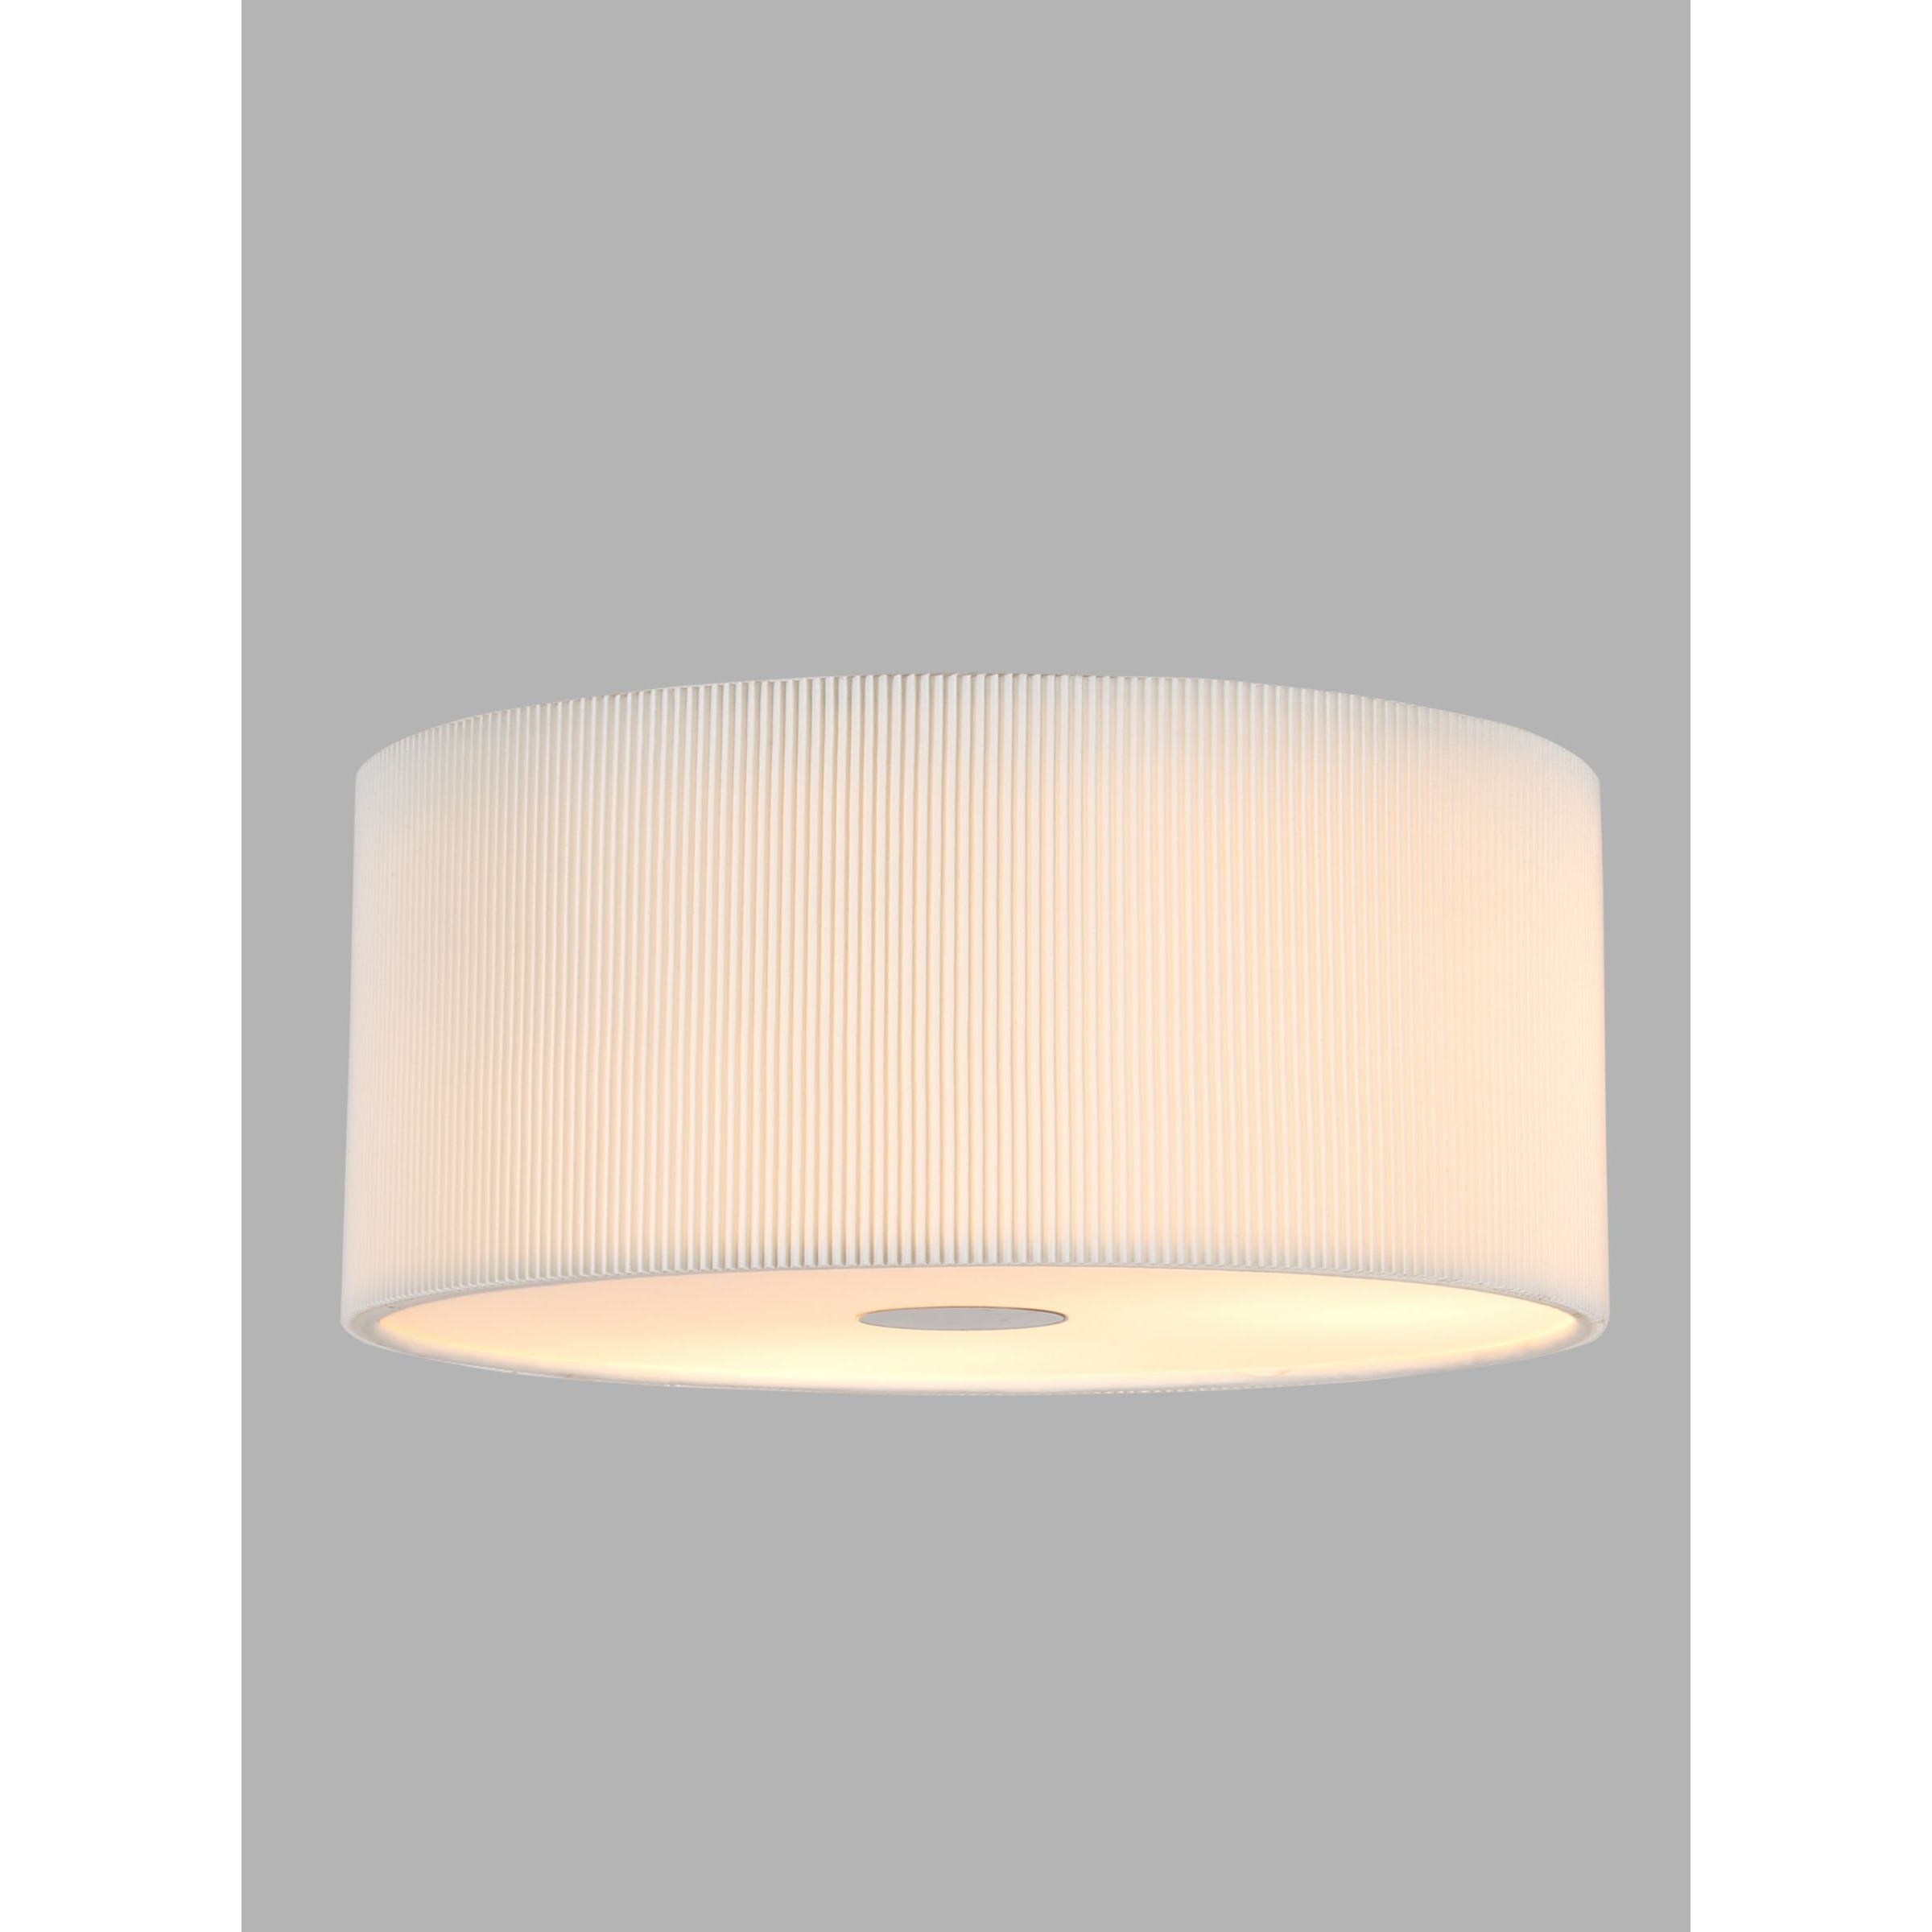 John Lewis Micropleated Diffuser Flush Ceiling Light, White - image 1